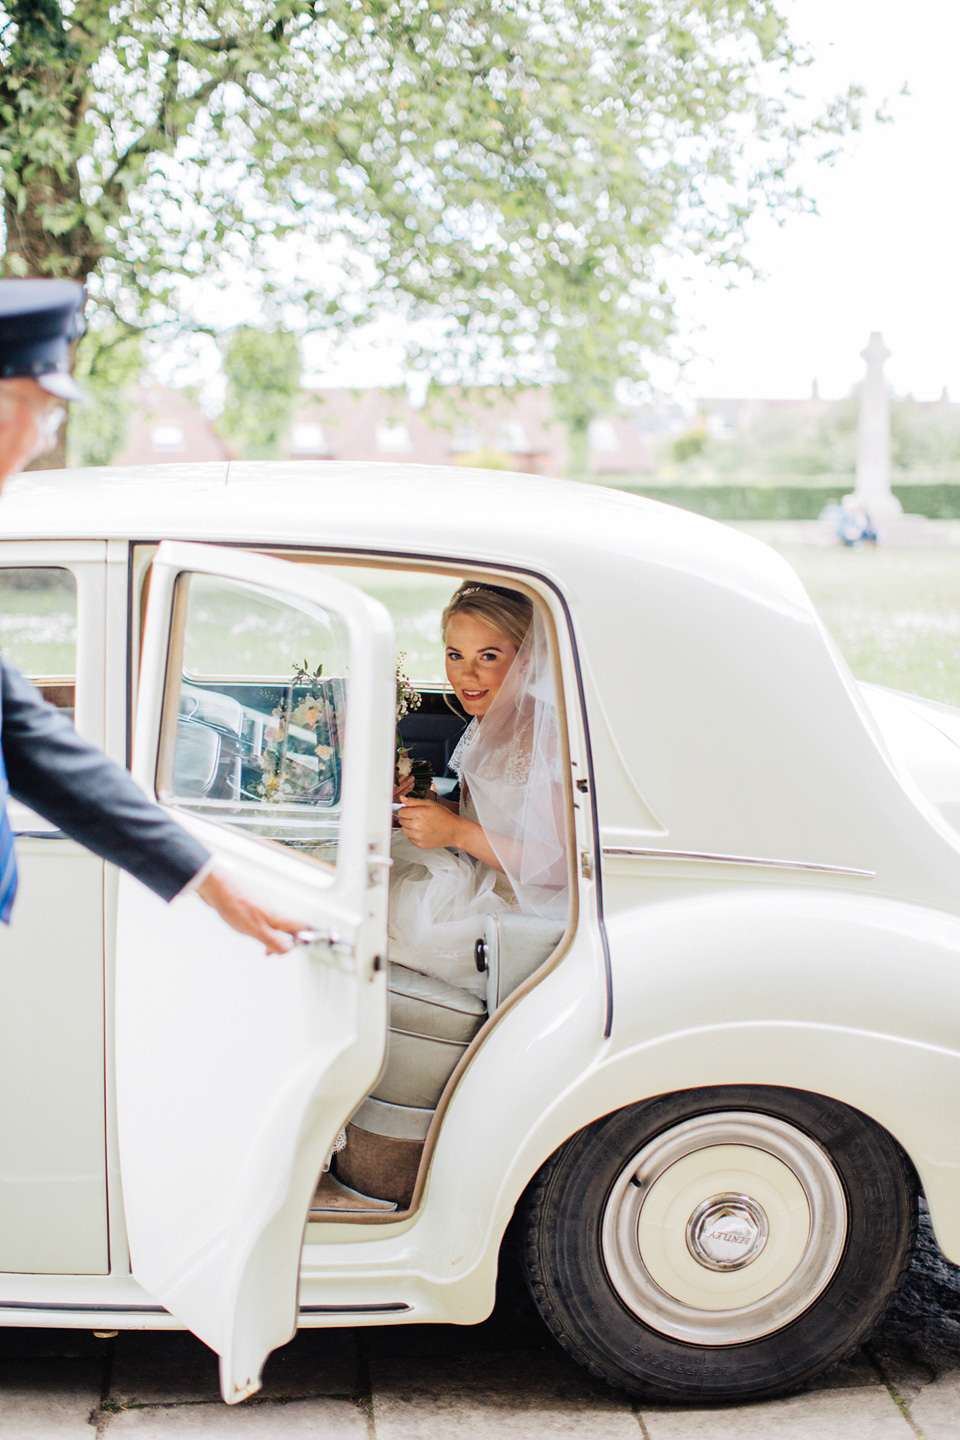 The bride wears Suzanne Neville for her Summer wedding at a vintage railway station. Images by M&J Photography.